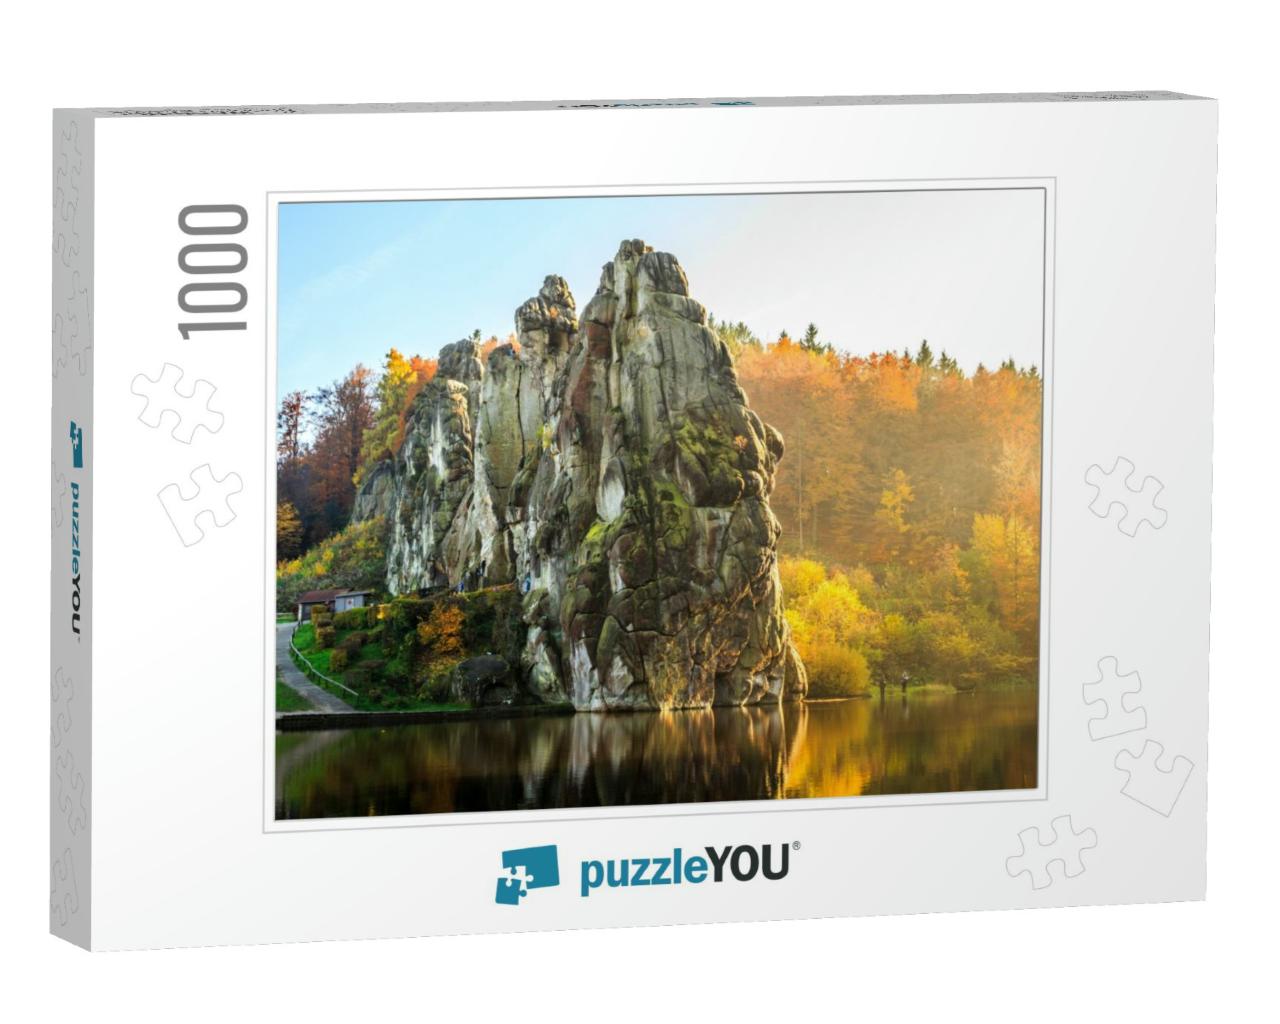 The Externsteine in the Teutoburg Forest, Germany, North... Jigsaw Puzzle with 1000 pieces